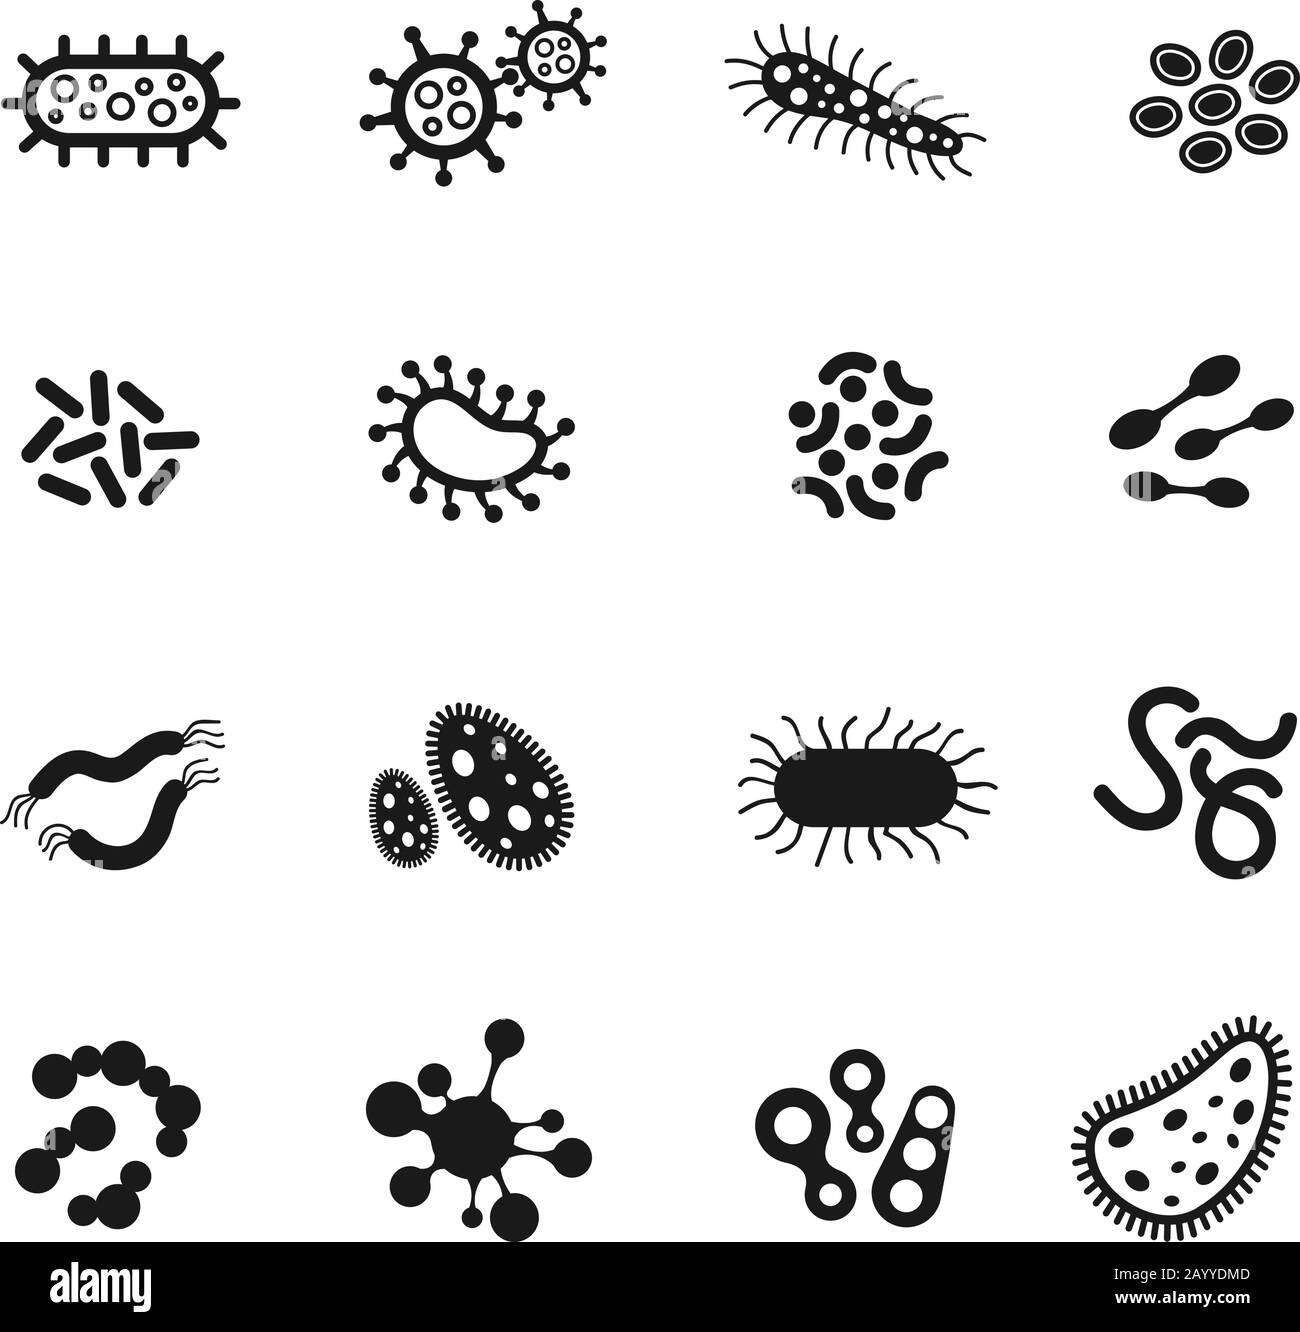 Bacteria, microbes, superbug, virus vector icons. Bacteria medicine and science biology virus infection, microscopic bacteria set illustration Stock Vector